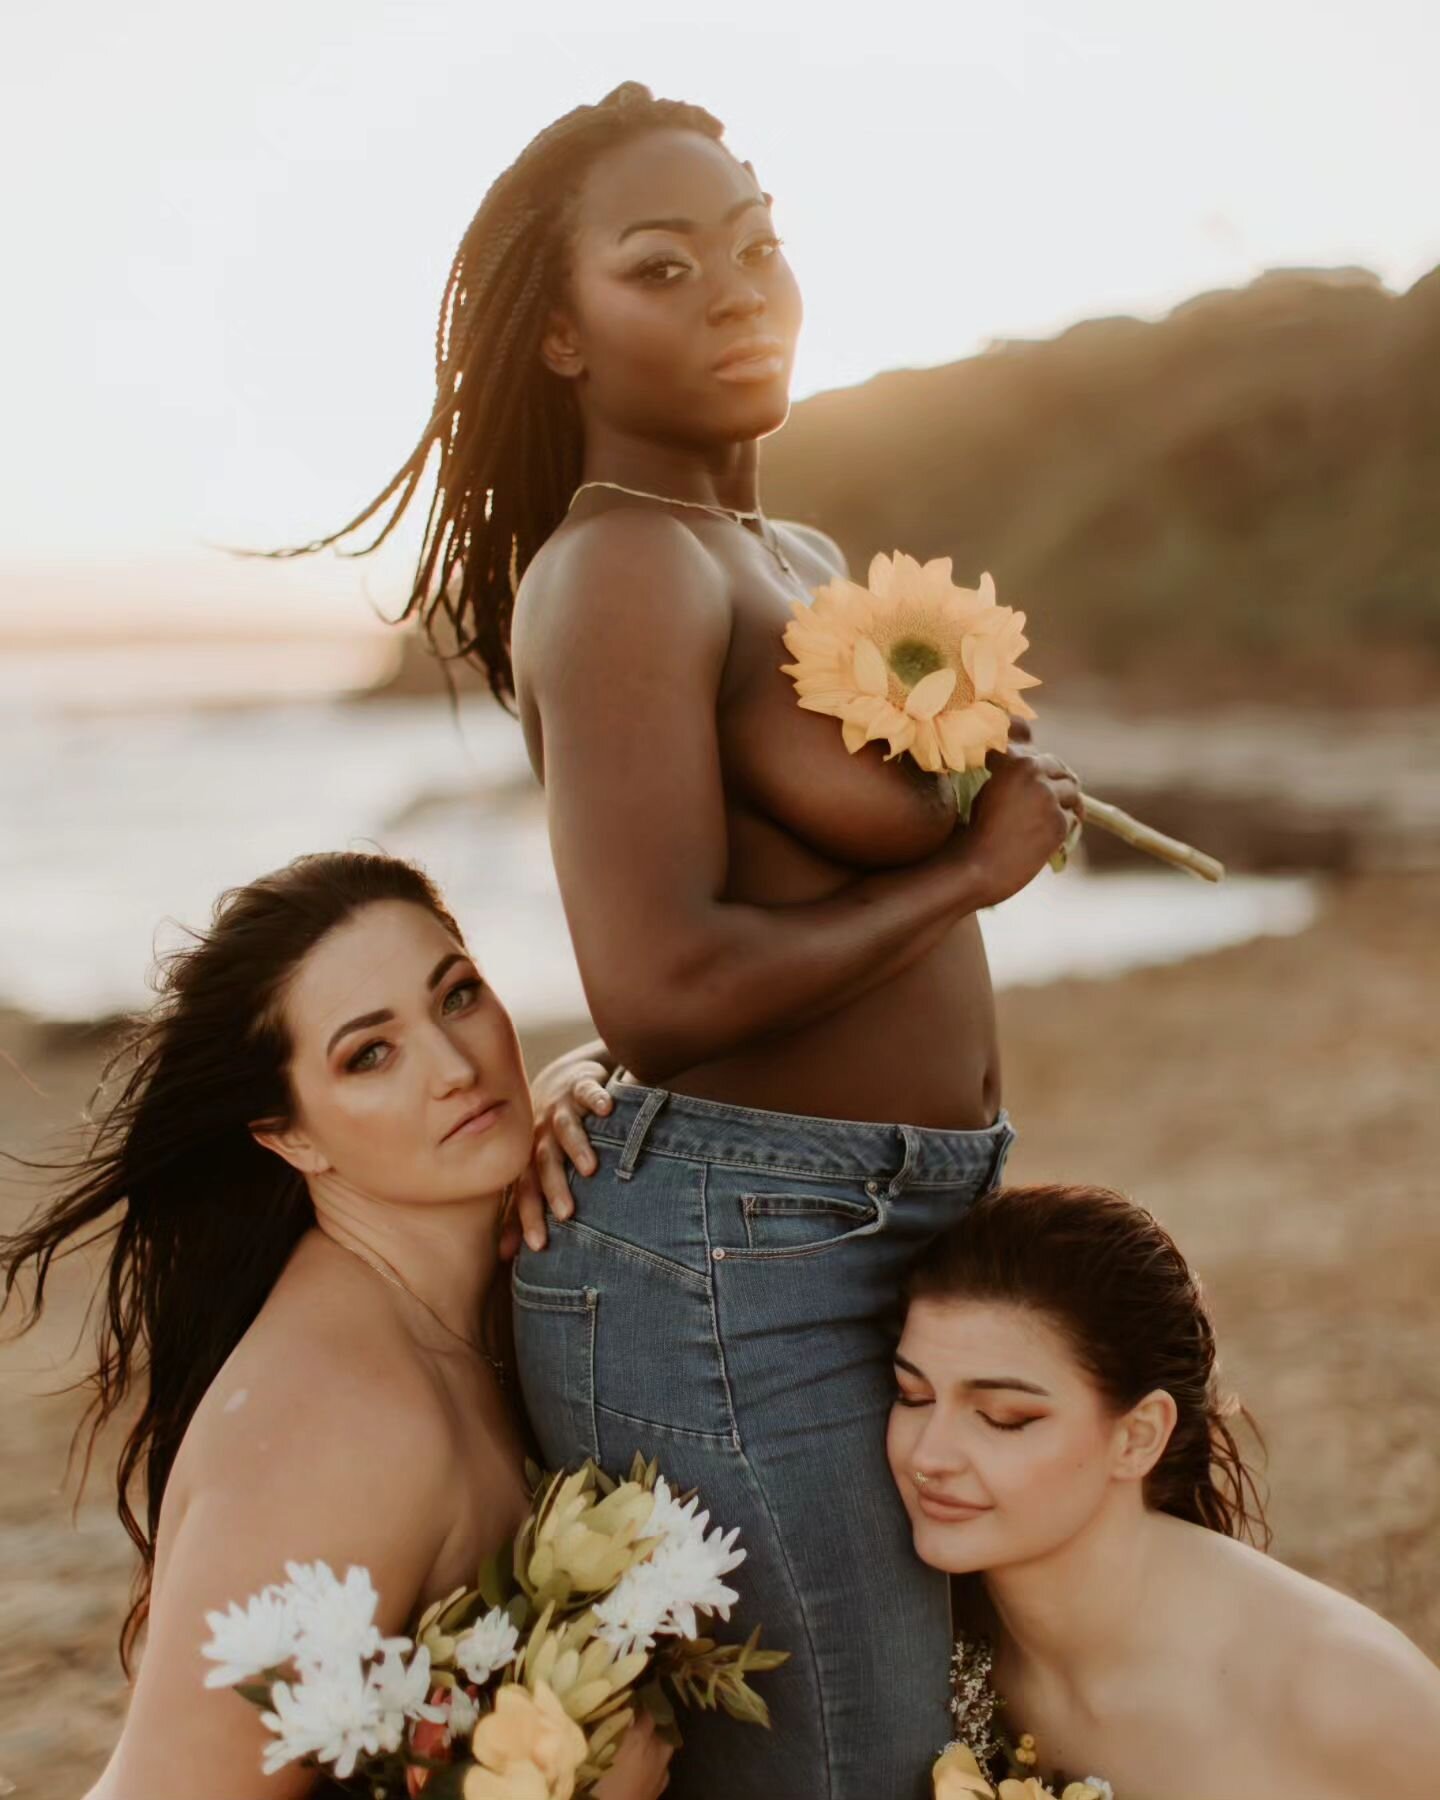 Empowering shoot with your girls!

Theme of &quot;I can buy myself flowers&quot;
Indeed you can. 

Amazing time working with
@ershehair again who worked magic on some hair and makeup

With these gorgeous ladies
@xoese_a  @petra_and_jacob and @callmeb